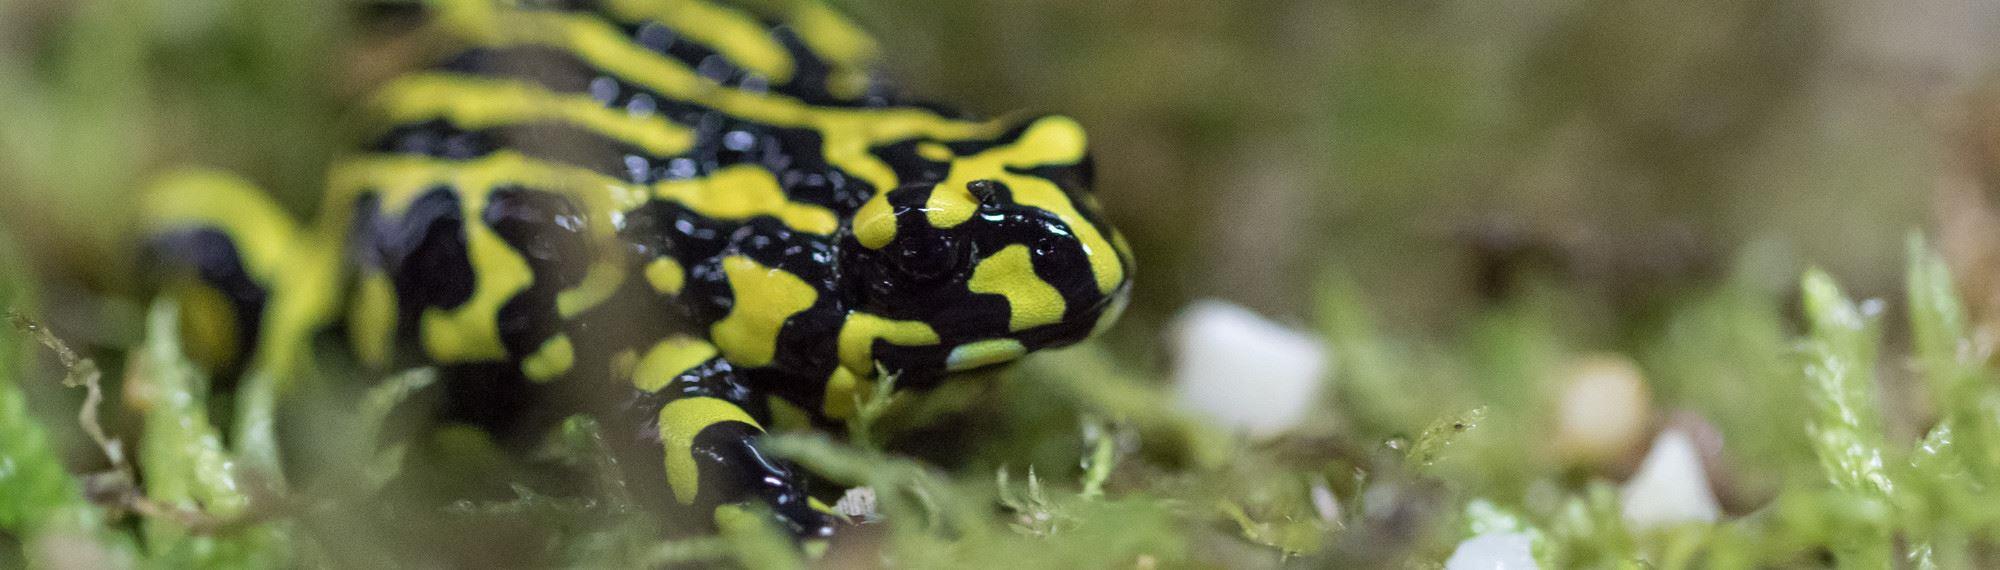 Southern Corroboree Frog standing on pale green moss. Frog is bright yellow and black striped.